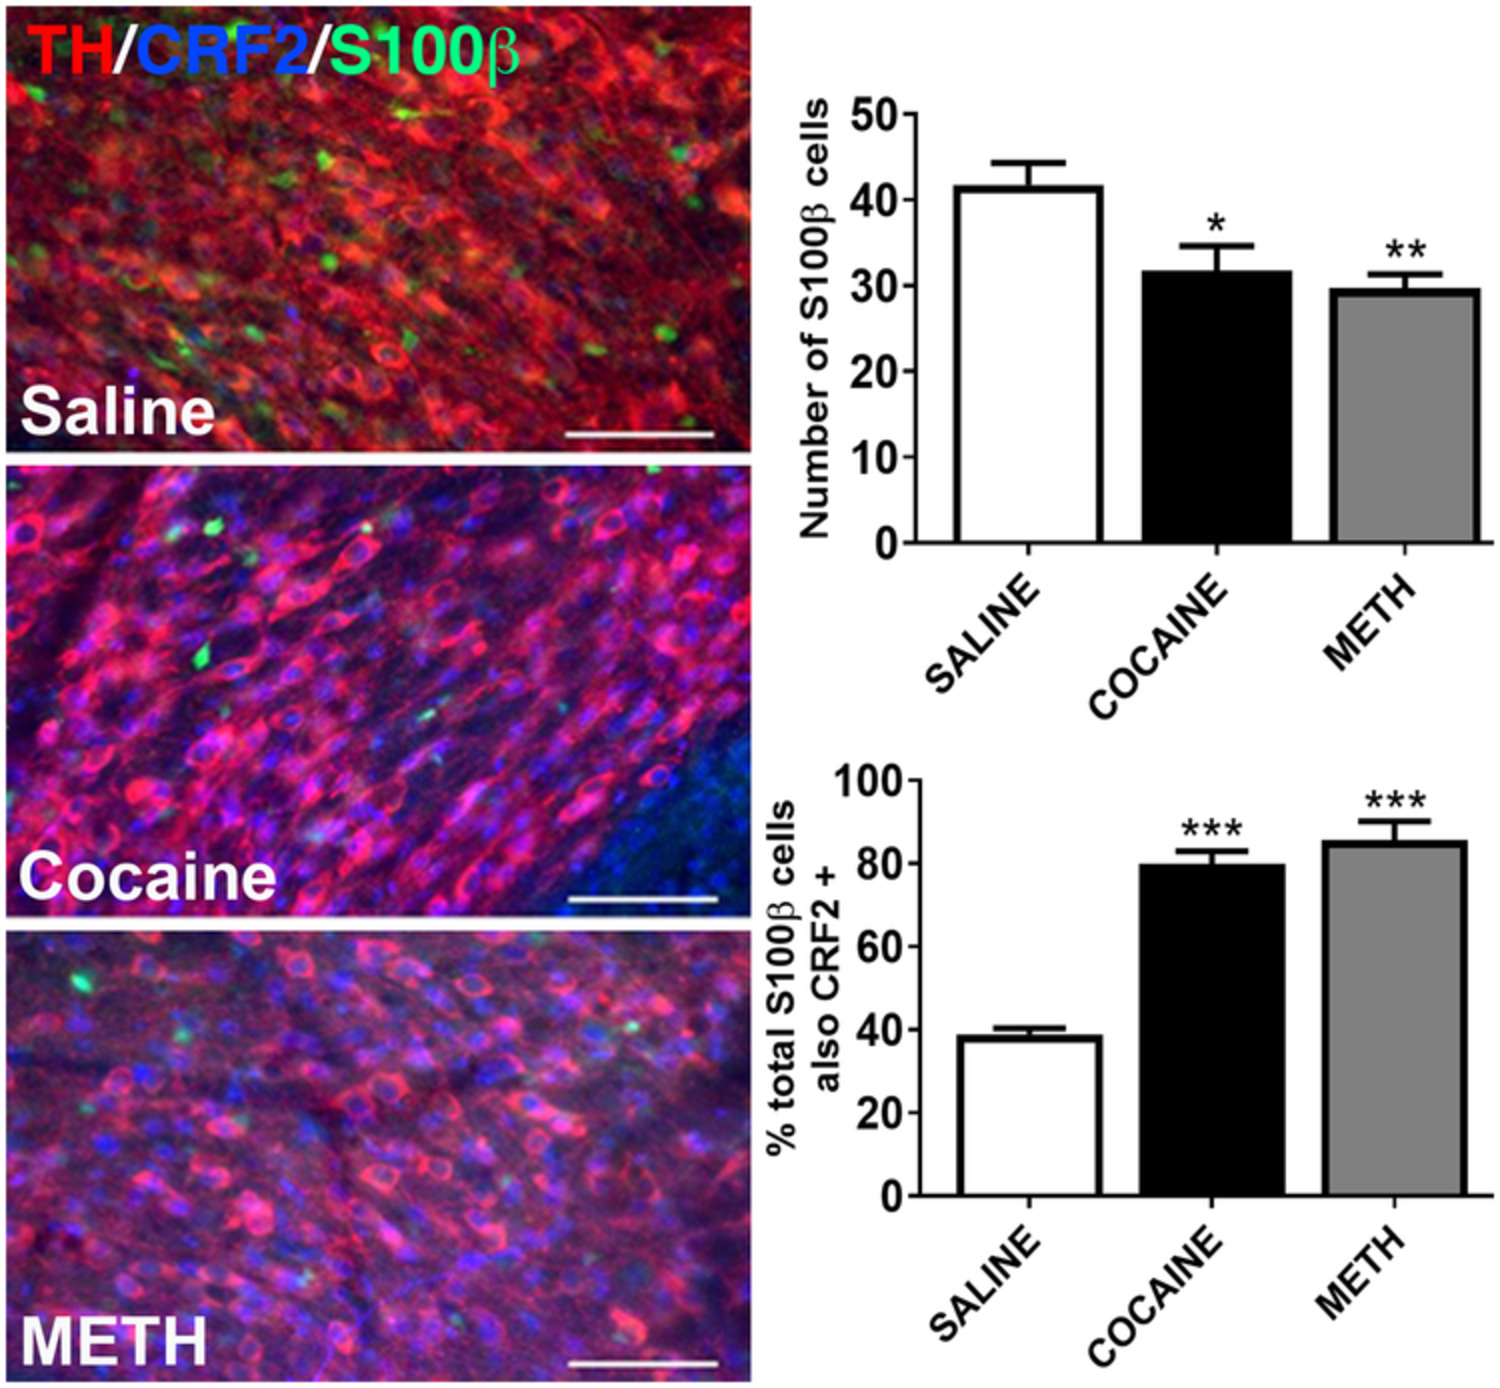 Repeated cocaine or methamphetamine treatment alters astrocytic CRF2 and GLAST expression in the ventral midbrain